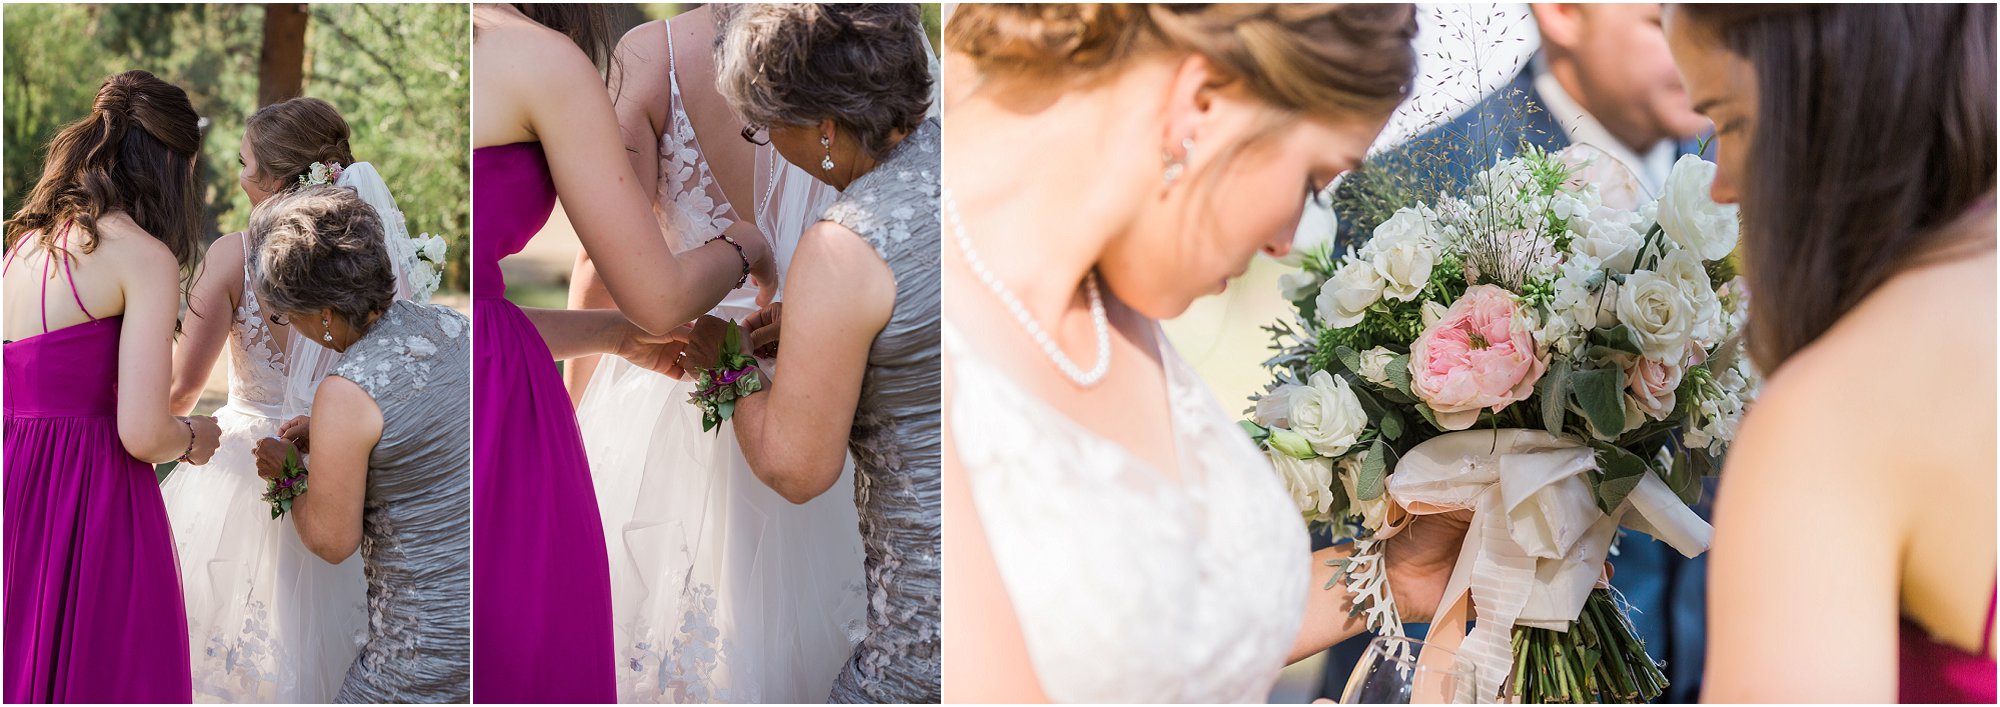 The bride's mother and sister help her bustle her wedding gown before her wedding reception at Rock Springs Ranch in Oregon, as photographed by Bend wedding photographer Erica Swantek Photography. 